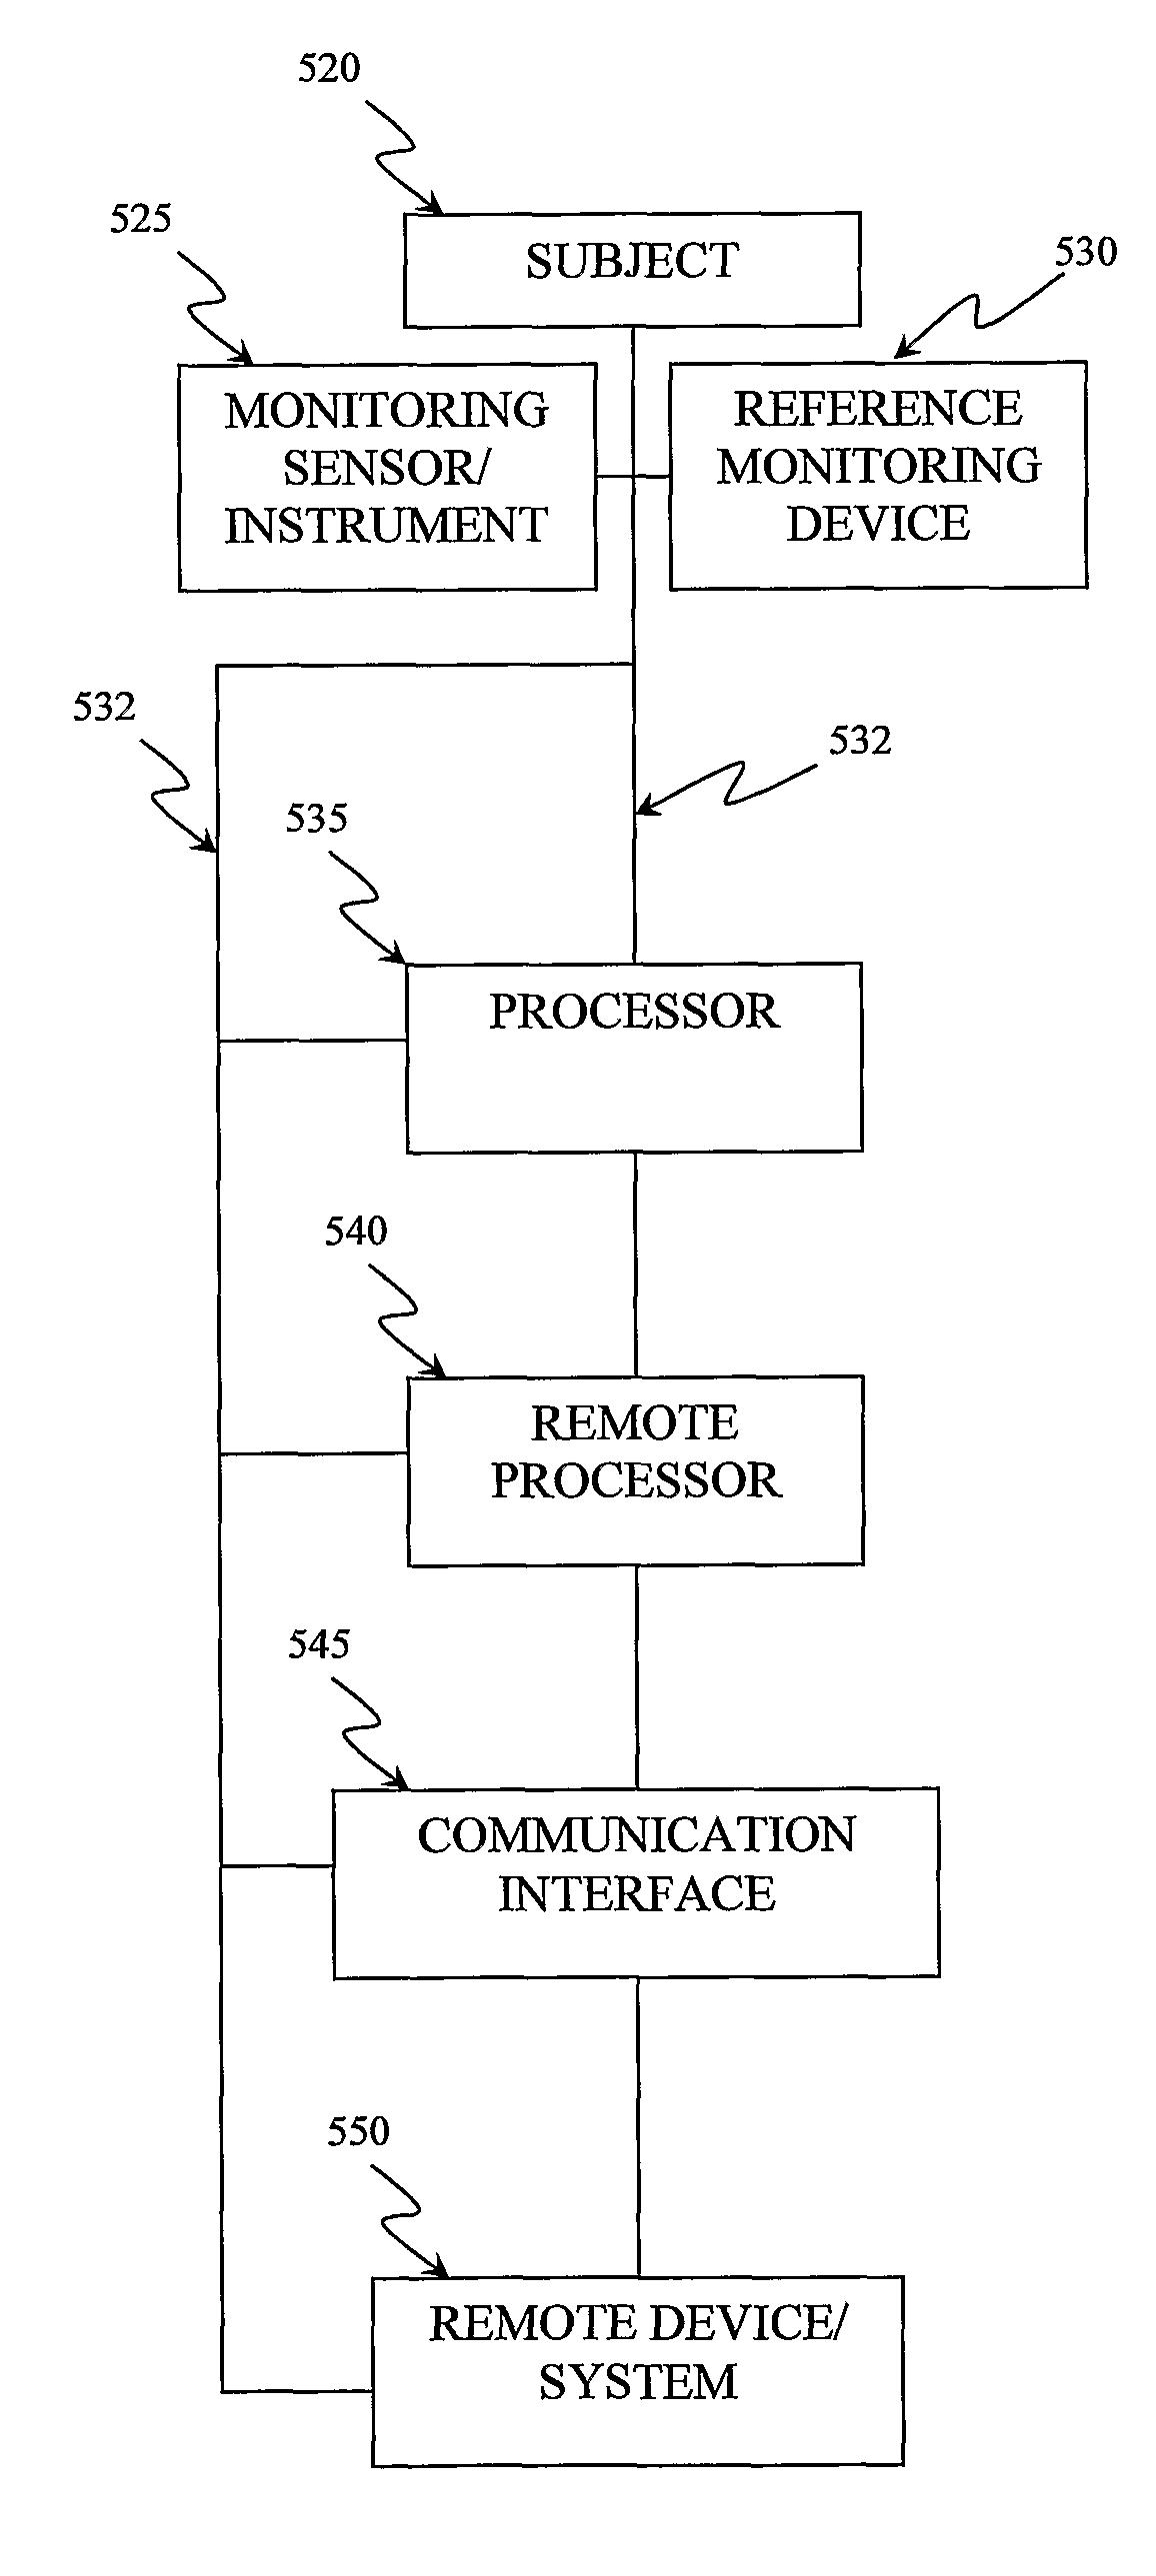 Method, system and computer program product for evaluating the accuracy of blood glucose monitoring sensors/devices